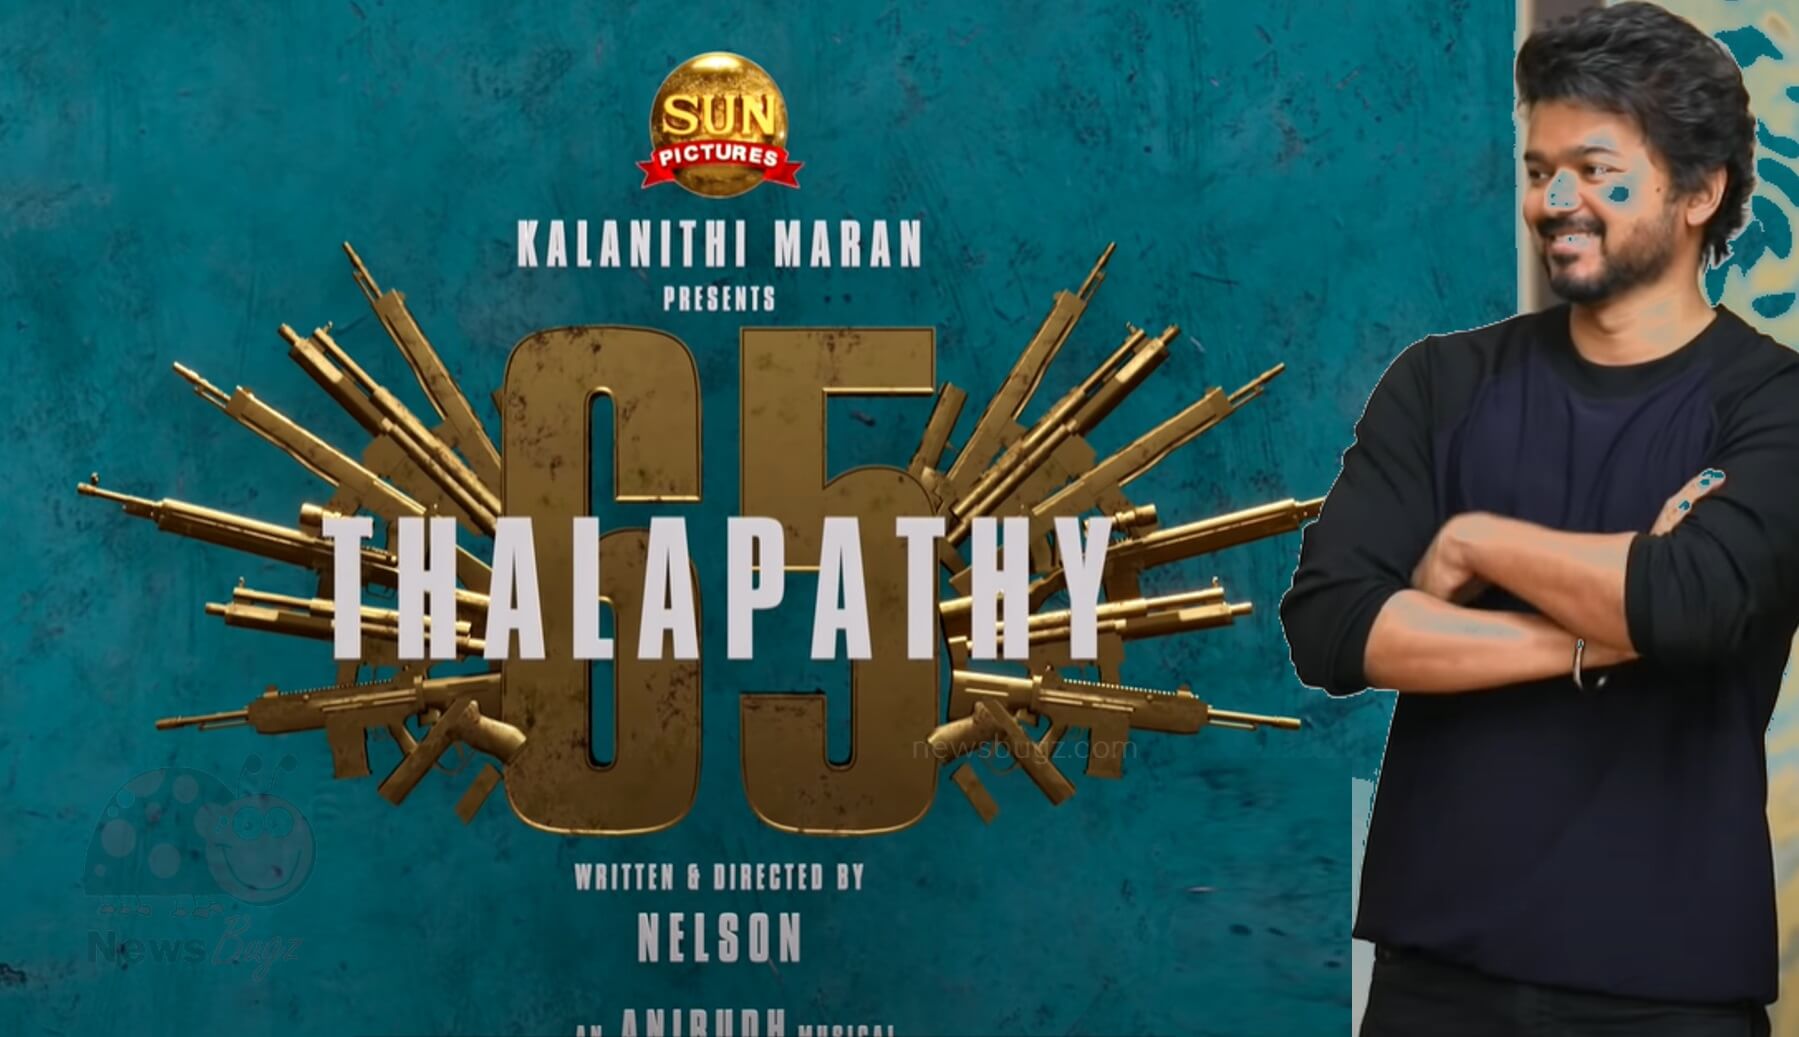 Thalapathy Vijay 65 Movie Full Details: Sun Picture, Nelson, Anirudh